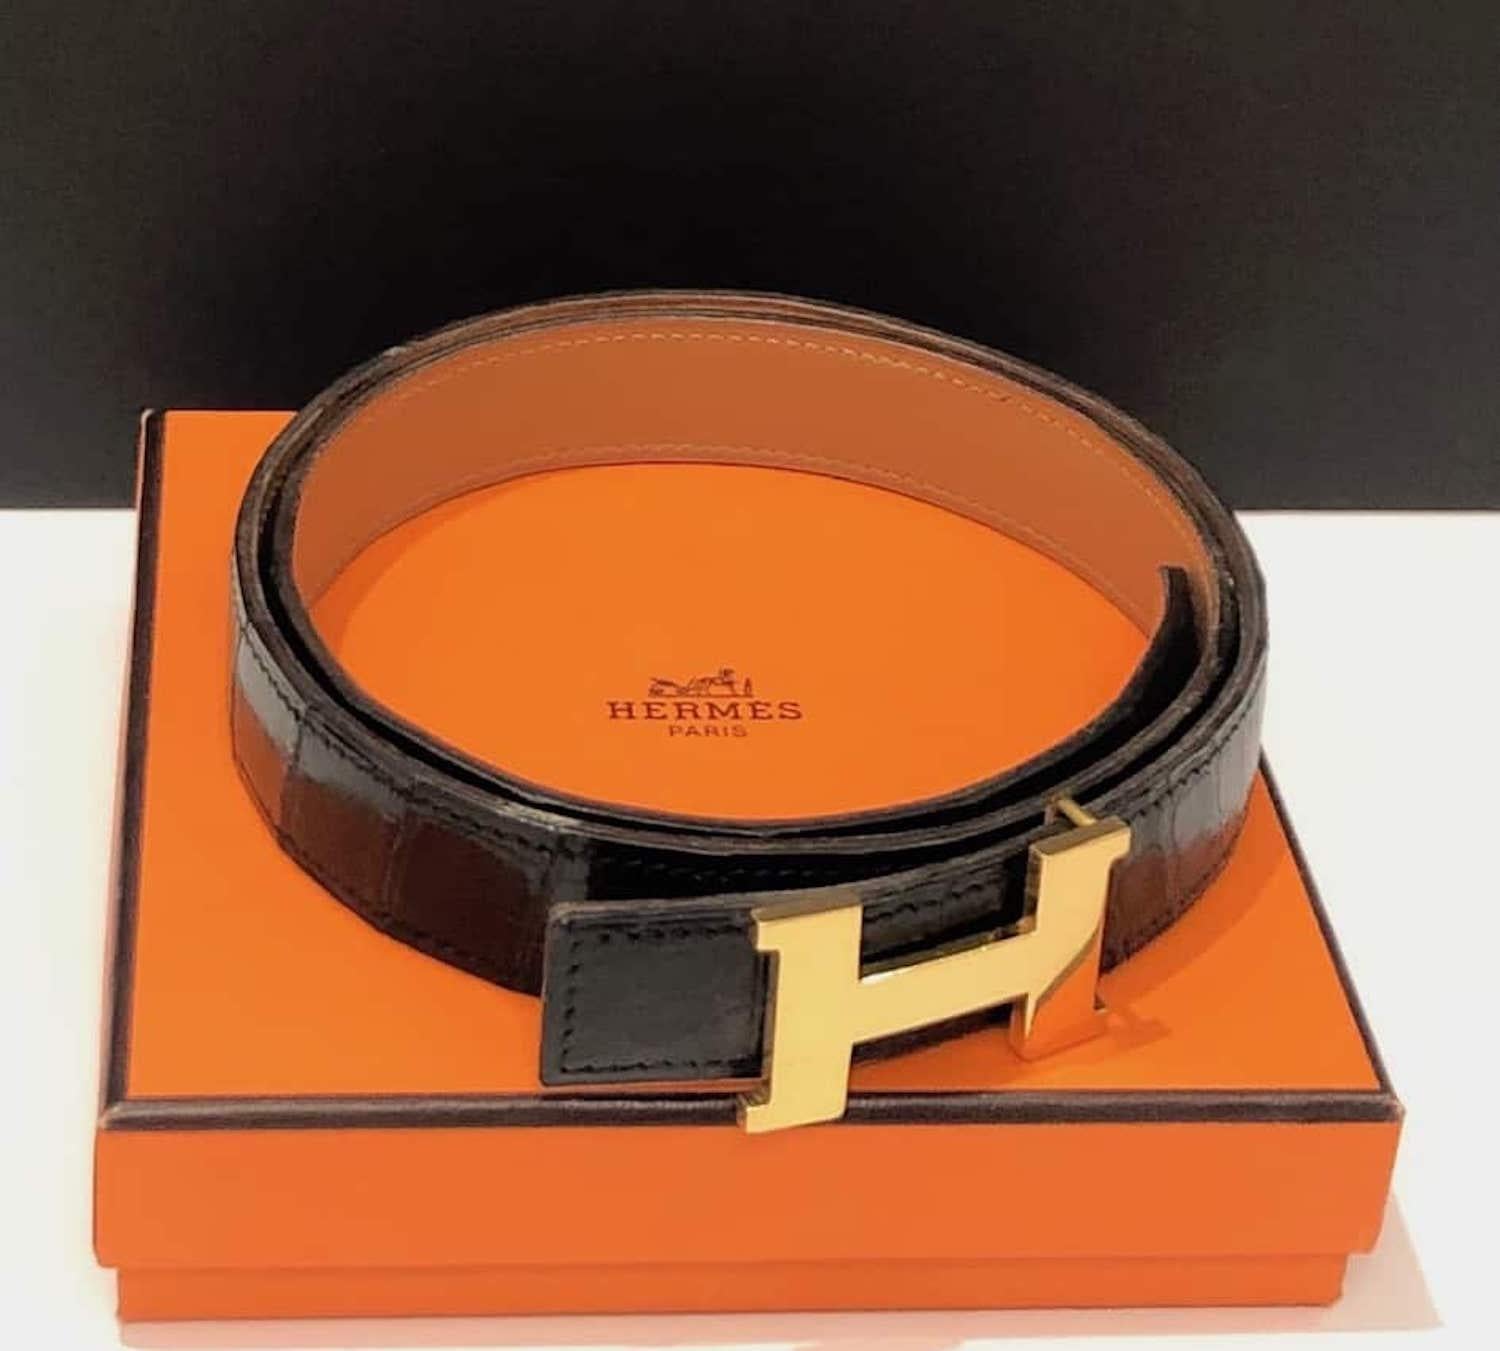 HERMÈS H Crocodile Constance Belt Black Vintage 1990s W/Box
A beautiful vintage 90s crocodile iconic HERMÈS Constance Belt. This croco H belt has kept a beautiful patina, the interior and the exterior are in very good condition. It is handcrafted